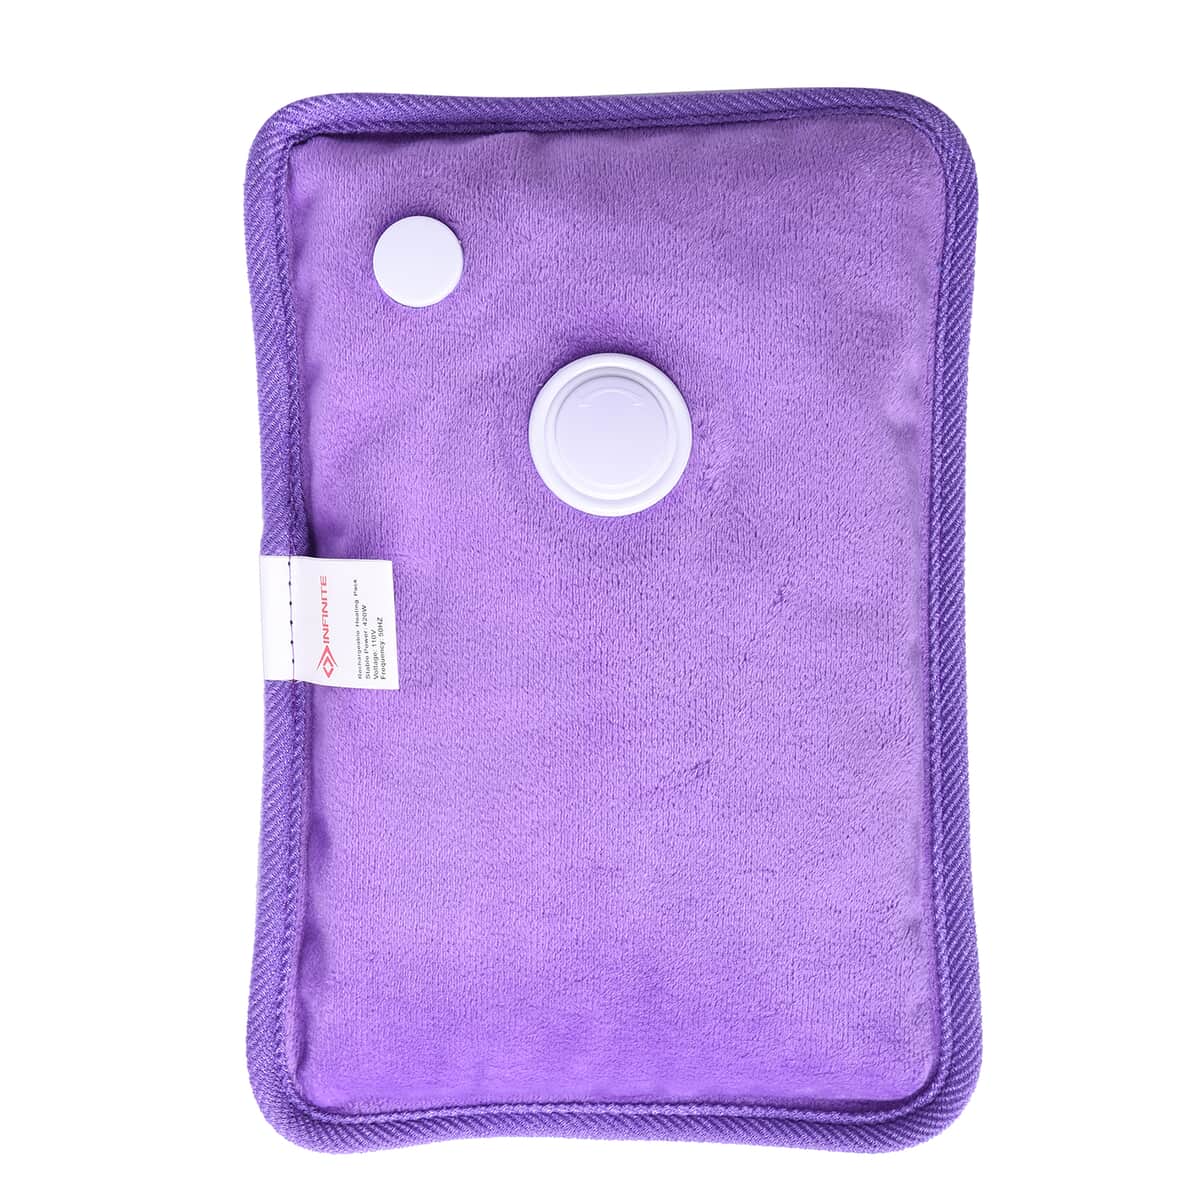 HOMESMART Rechargeable Hand Warmer Pillow Heating Bag Electric Hot Water Bottle -Purple image number 0